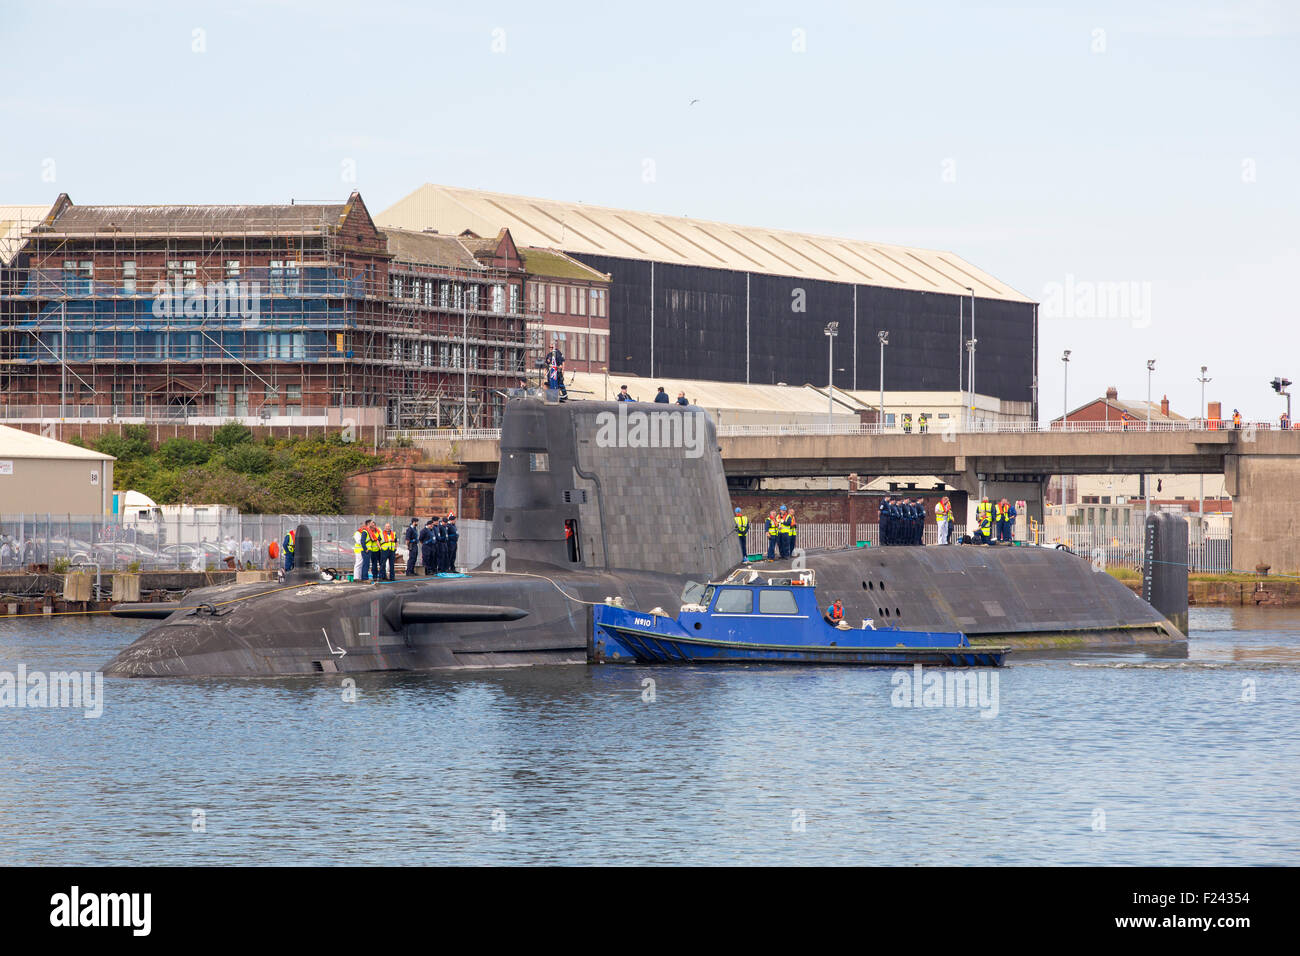 The Artful an Astute class hunter killer nuclear powered submarine is moved from BAE Systems in Barrow in Furness up to the Faslane submarine base in Scotland, UK. In the background is the nuclear transport ship, The Heron.  The submarines are armed with Spearfish torpedoes and Tomahawk Cruise missiles. Stock Photo